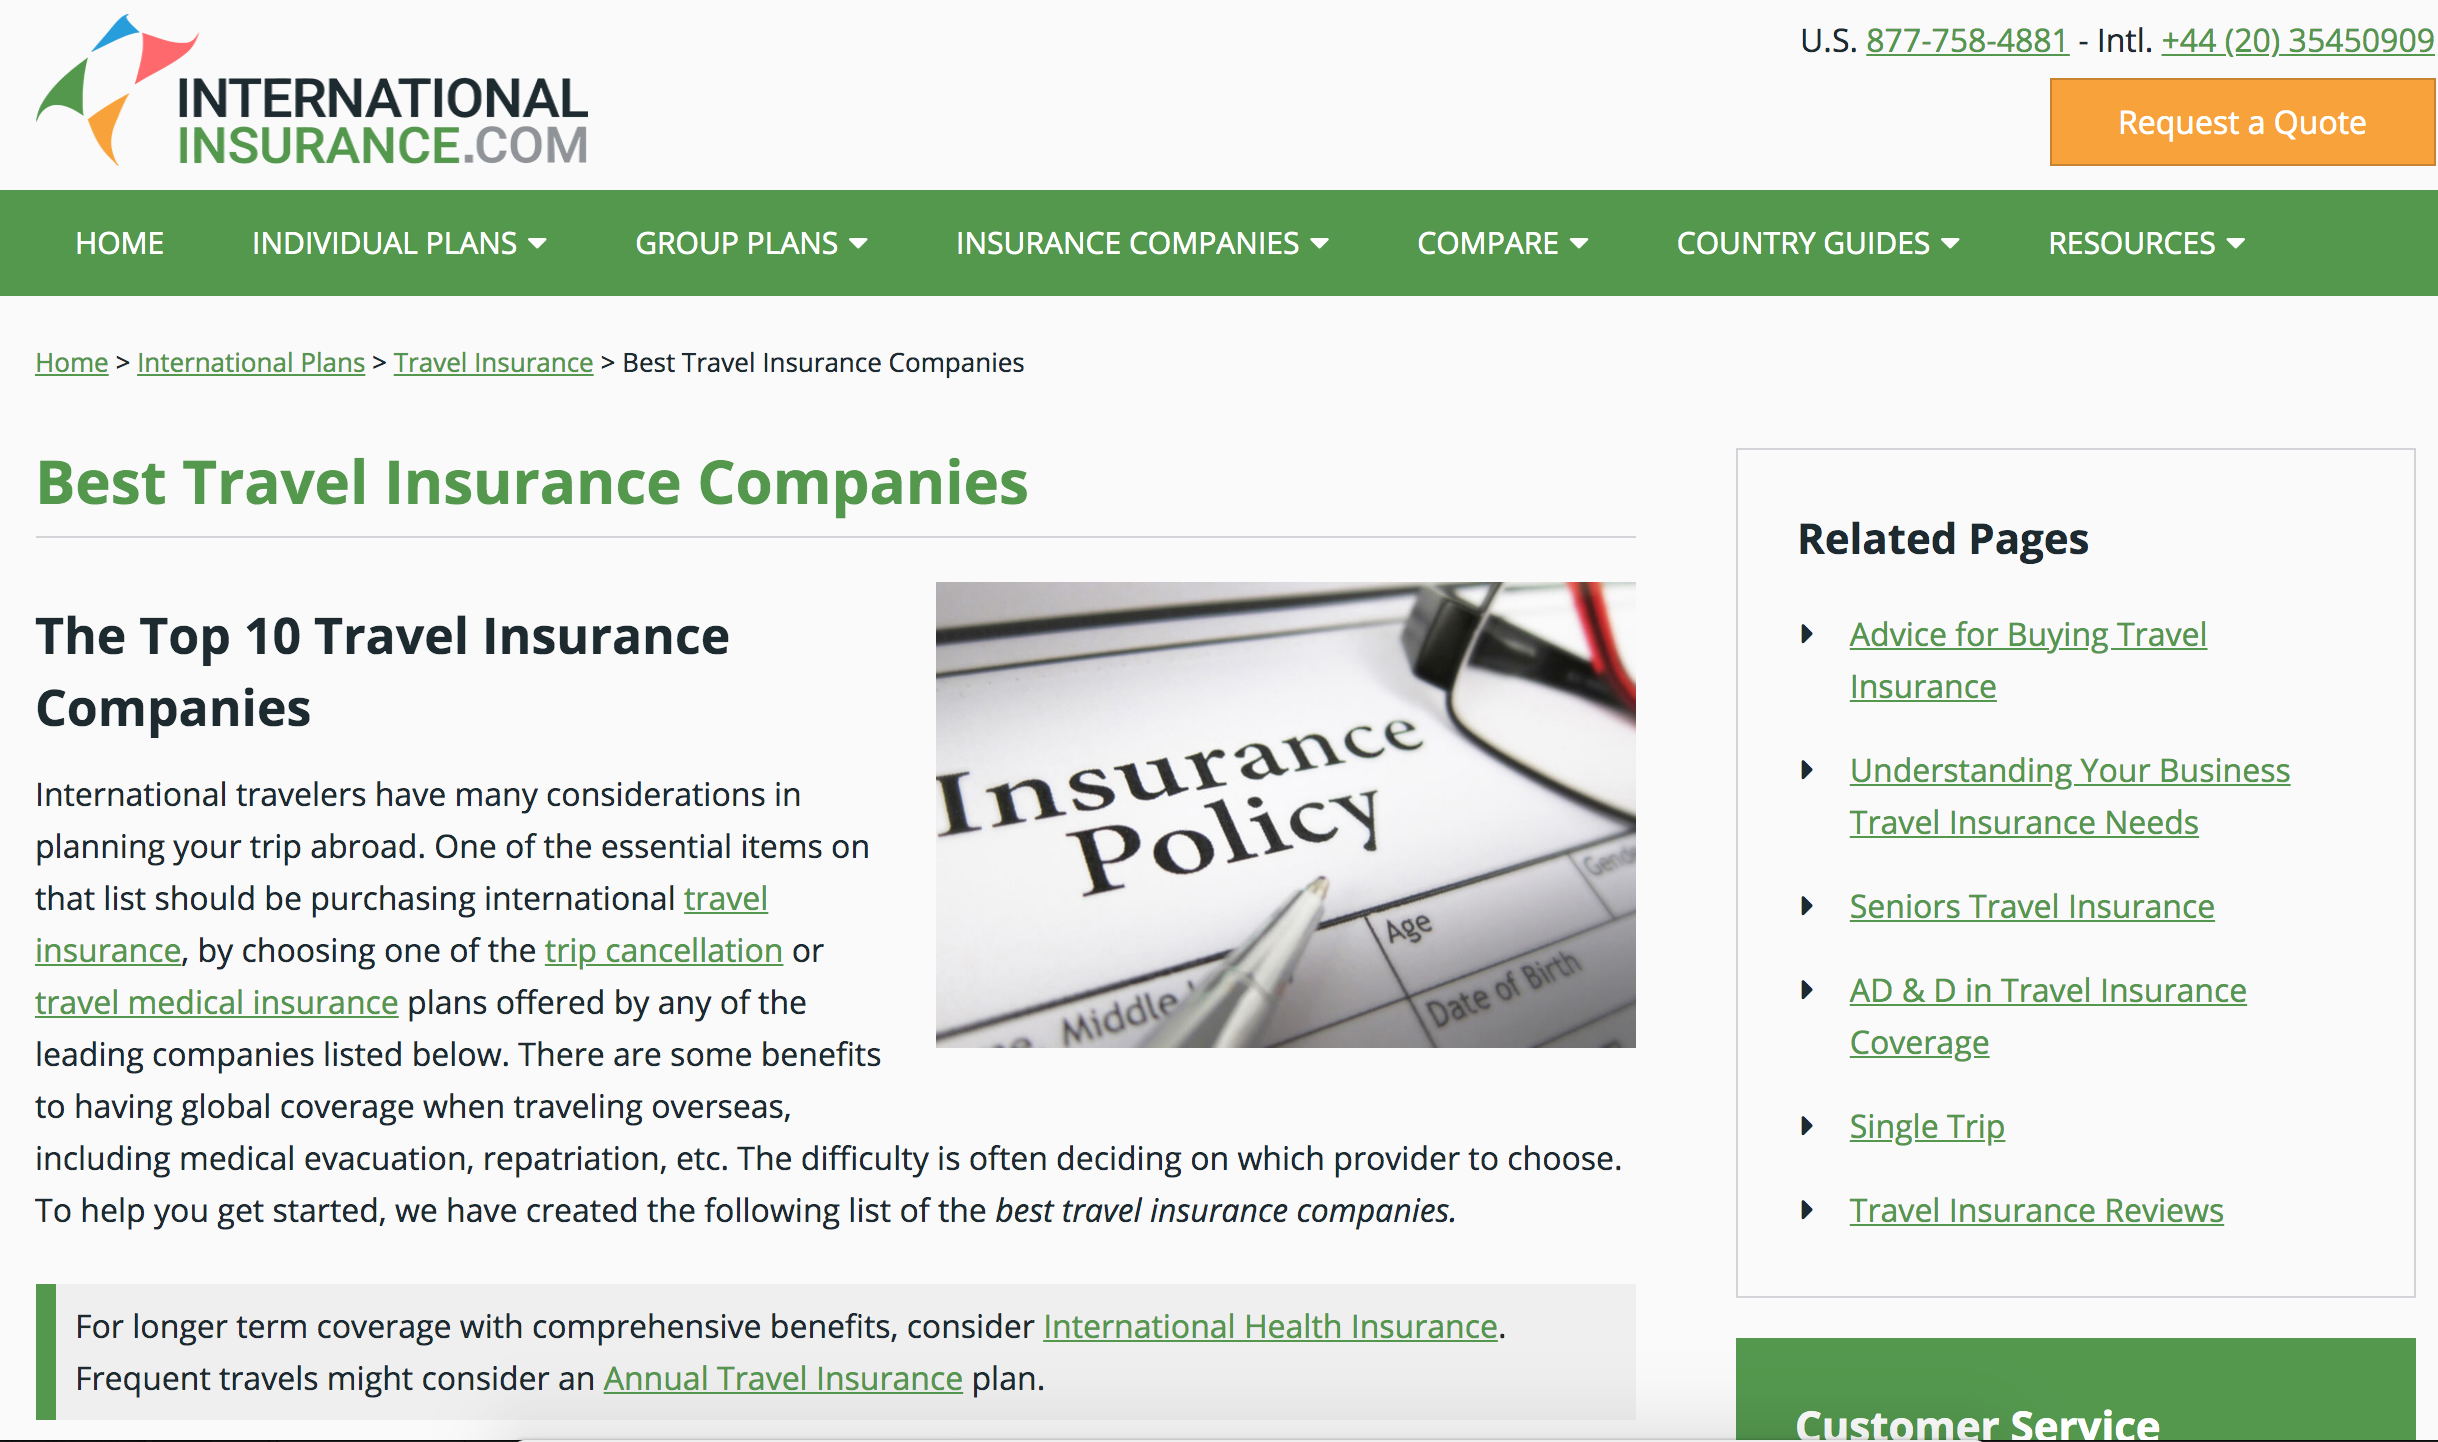 Find pricing, reviews and other details about International Citizens Insurance